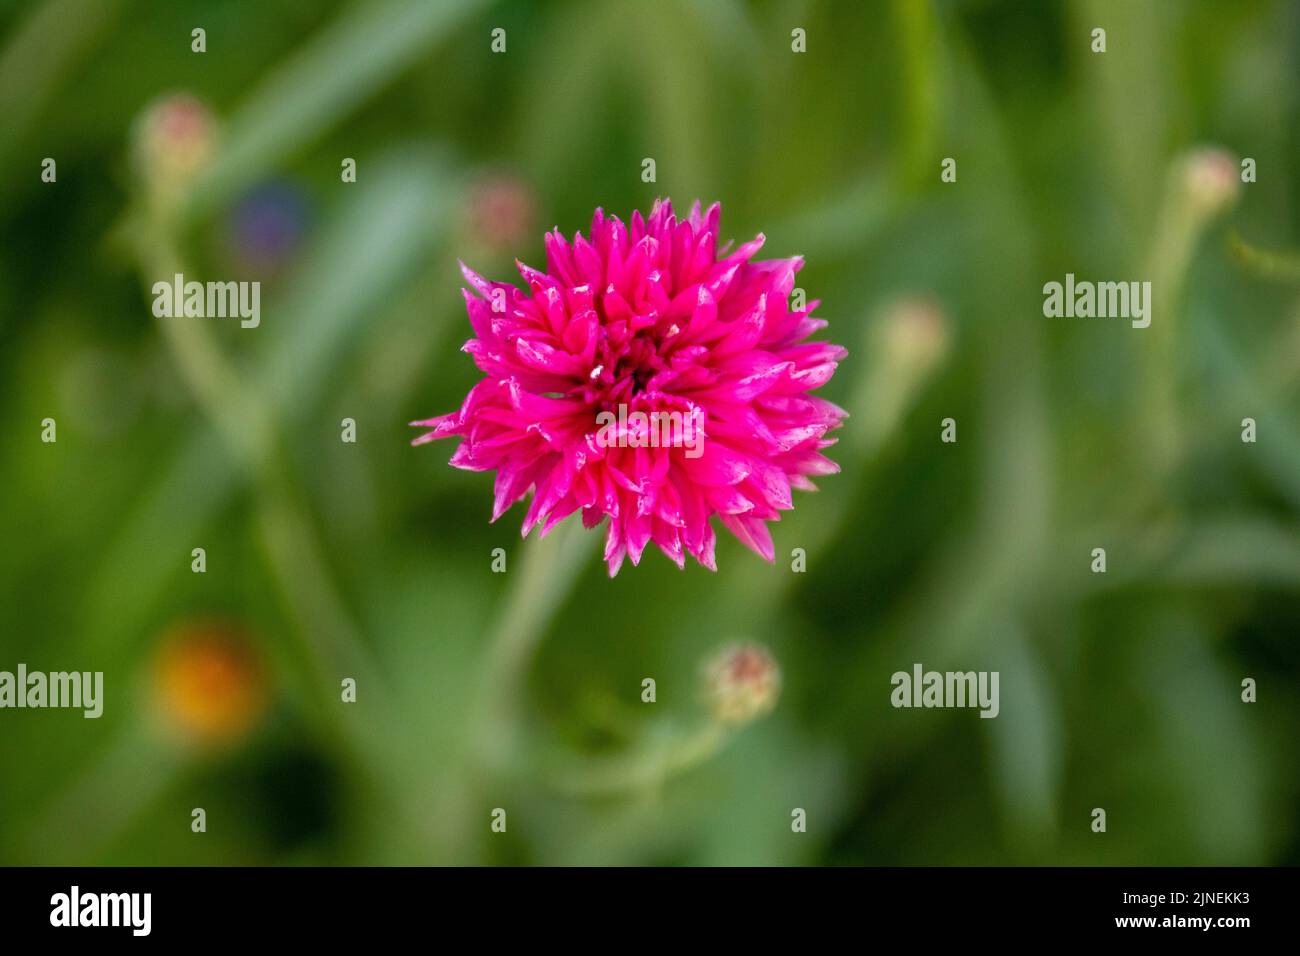 bright pink flower of the cornflower also known as bachelor's button with a blurred green background Stock Photo